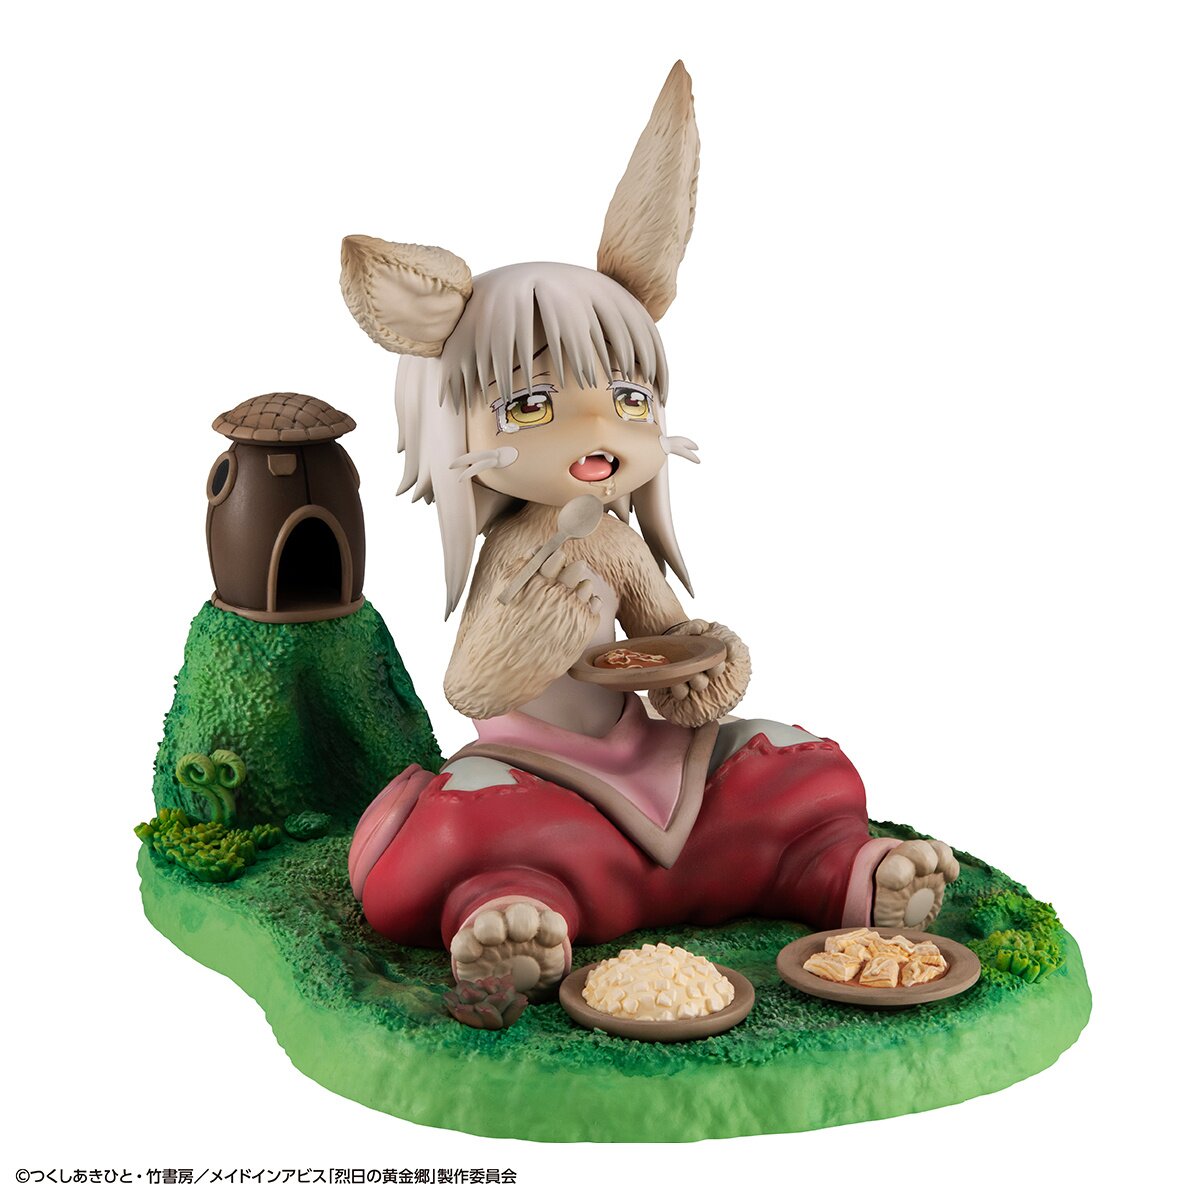 This 1/1 Scale Made in Abyss Figure Will Only Set You Back $3600